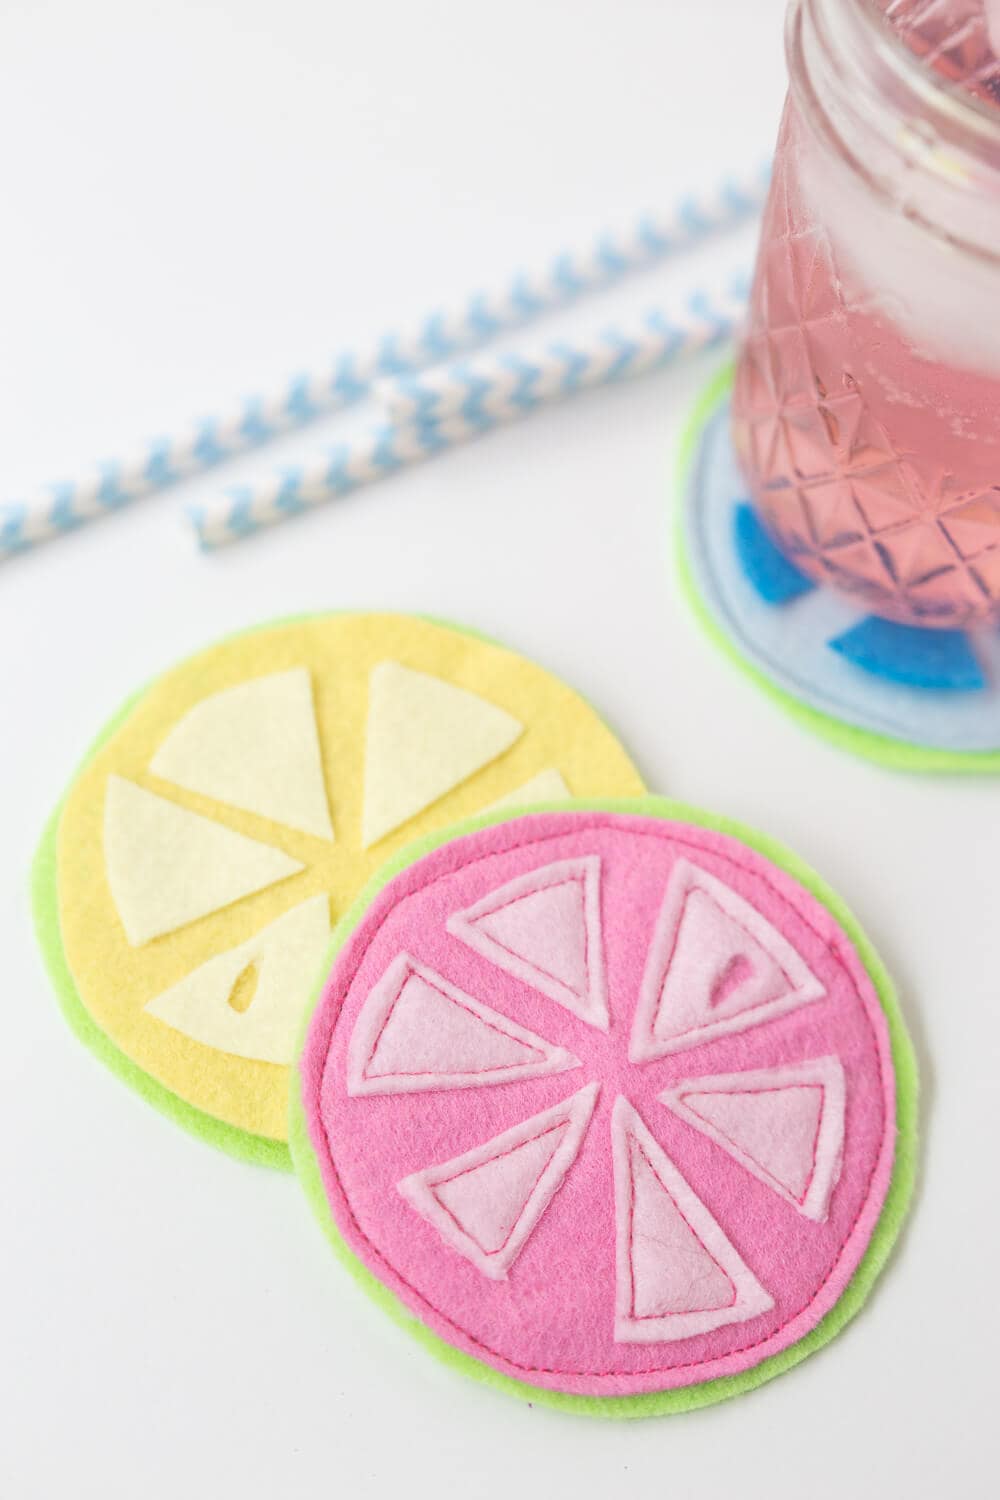 Citrus Coasters - an easy DIY for your cool summer drinks!